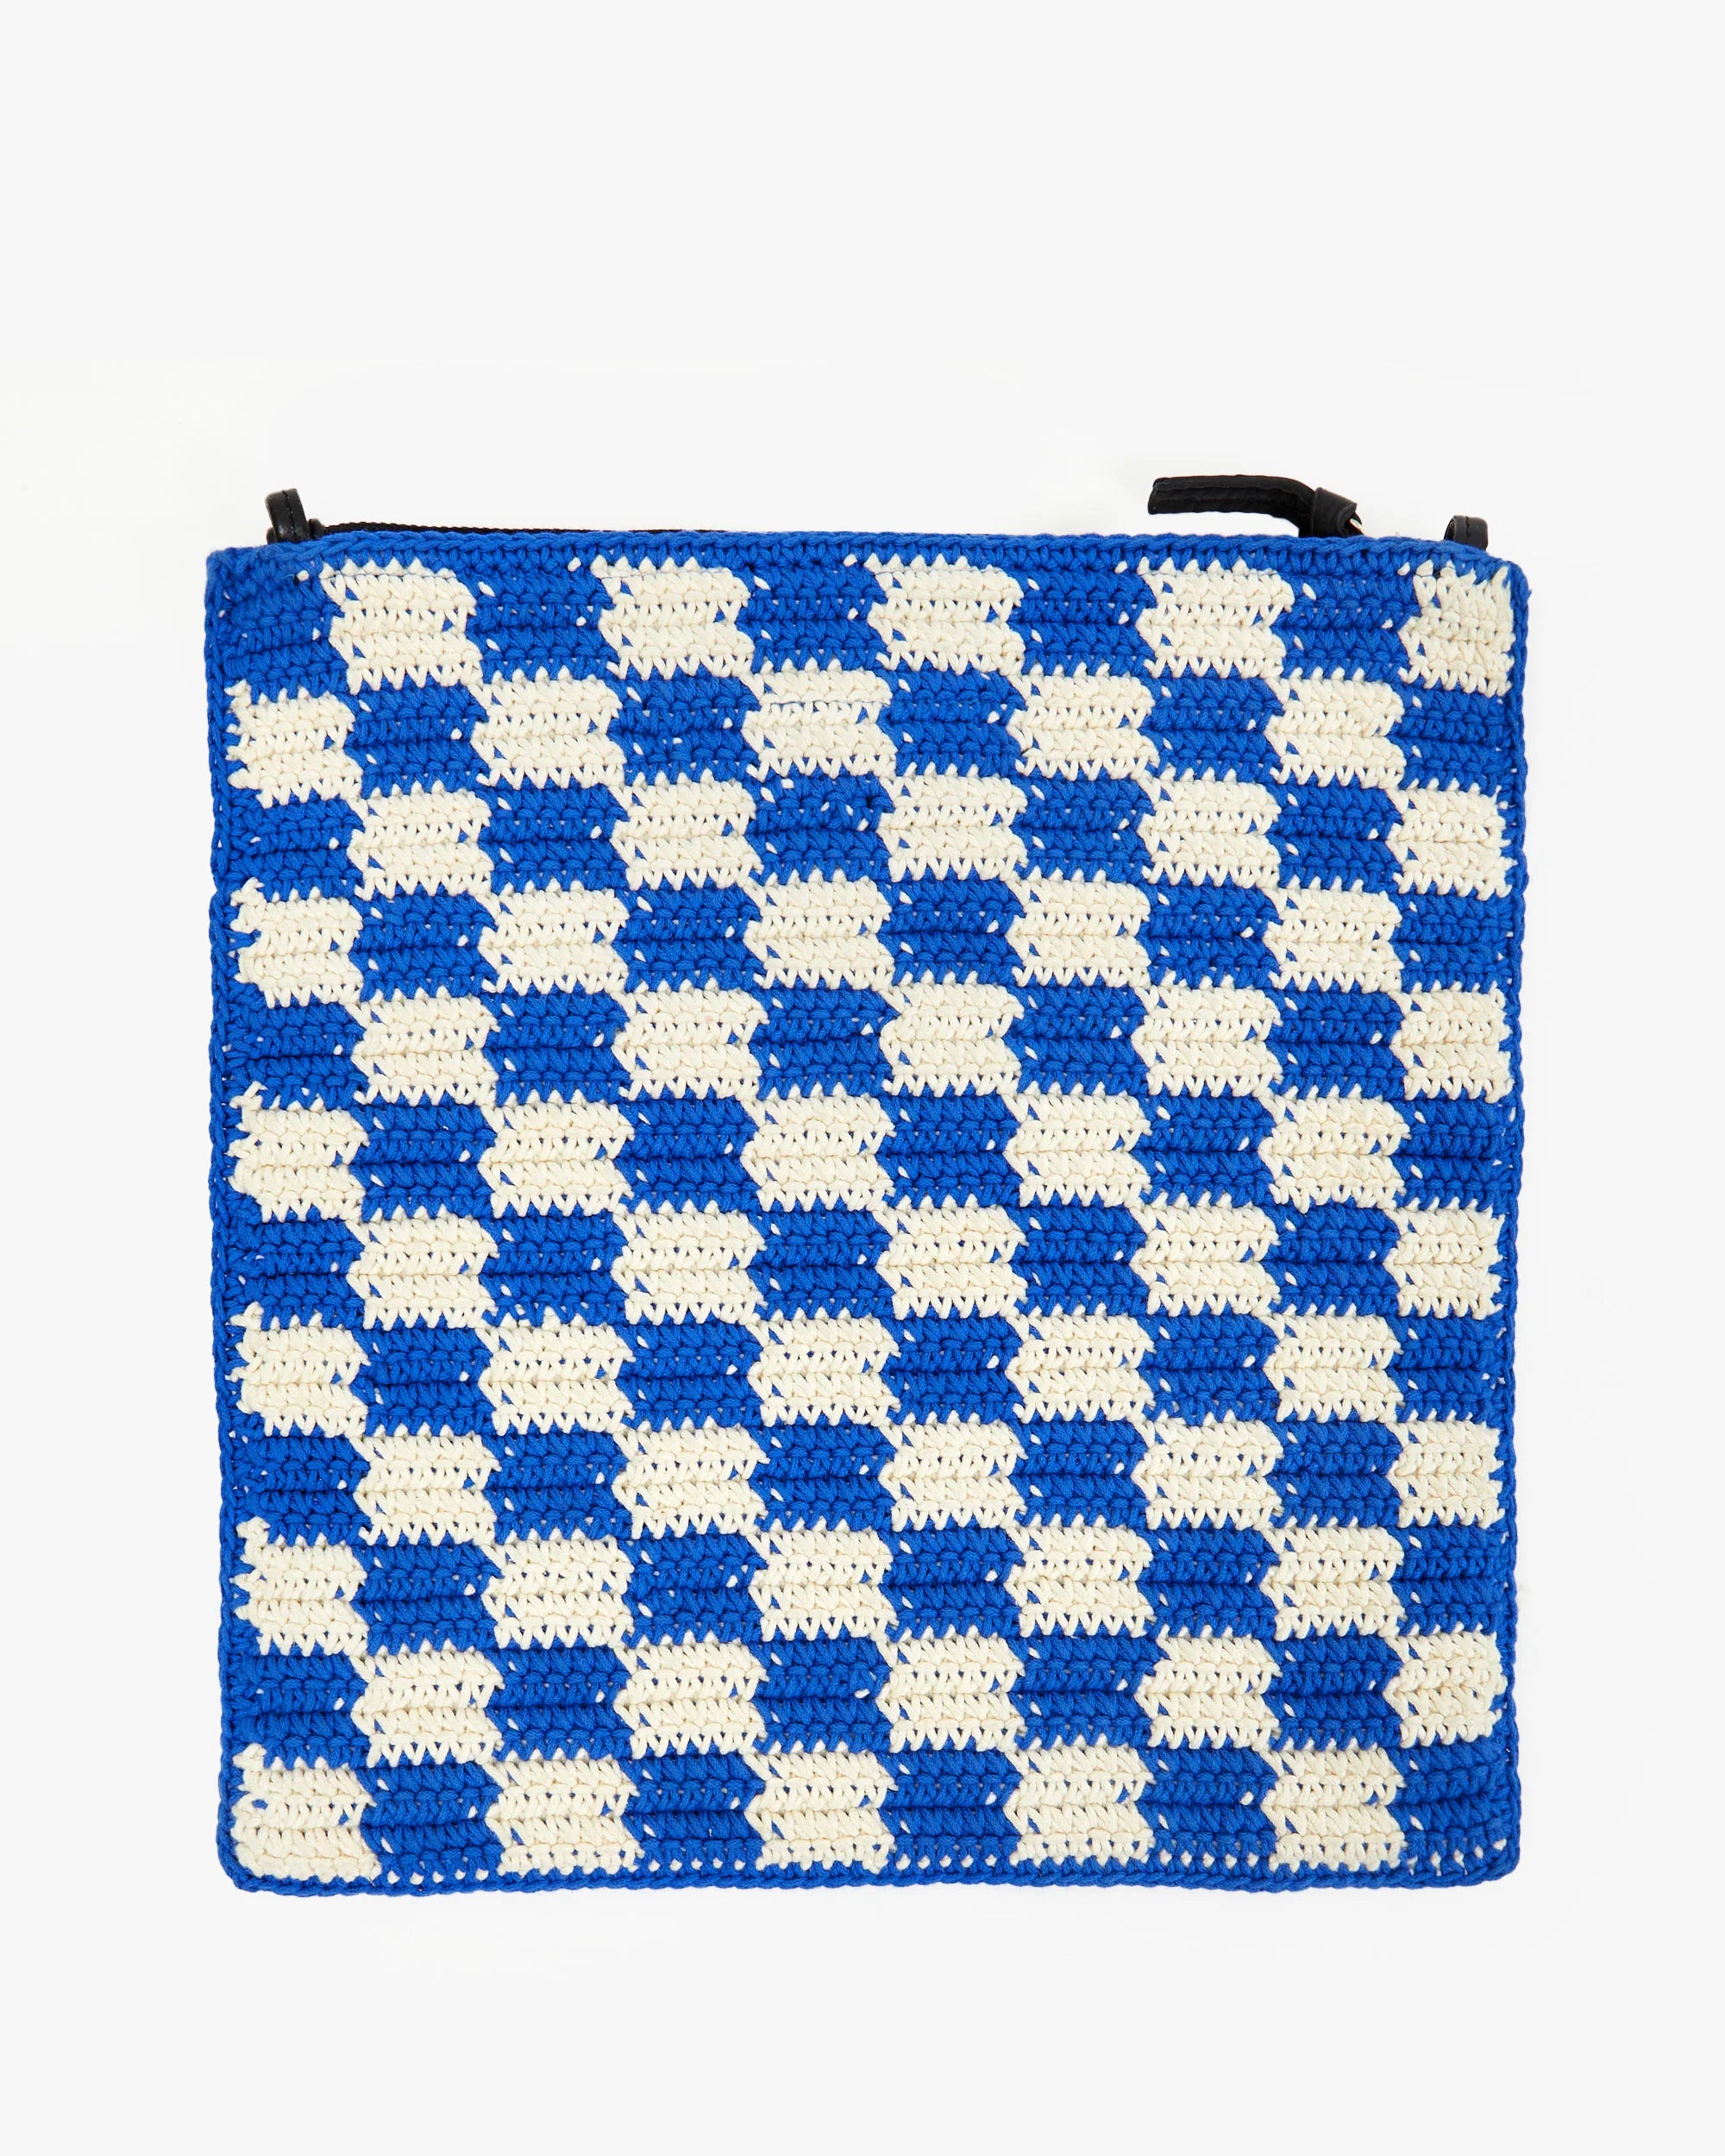 A crocheted cotton bag featuring a checkered pattern with alternating blue and white squares. The Foldover Clutch w/Tabs by Clare Vivier has dark handles at the top.